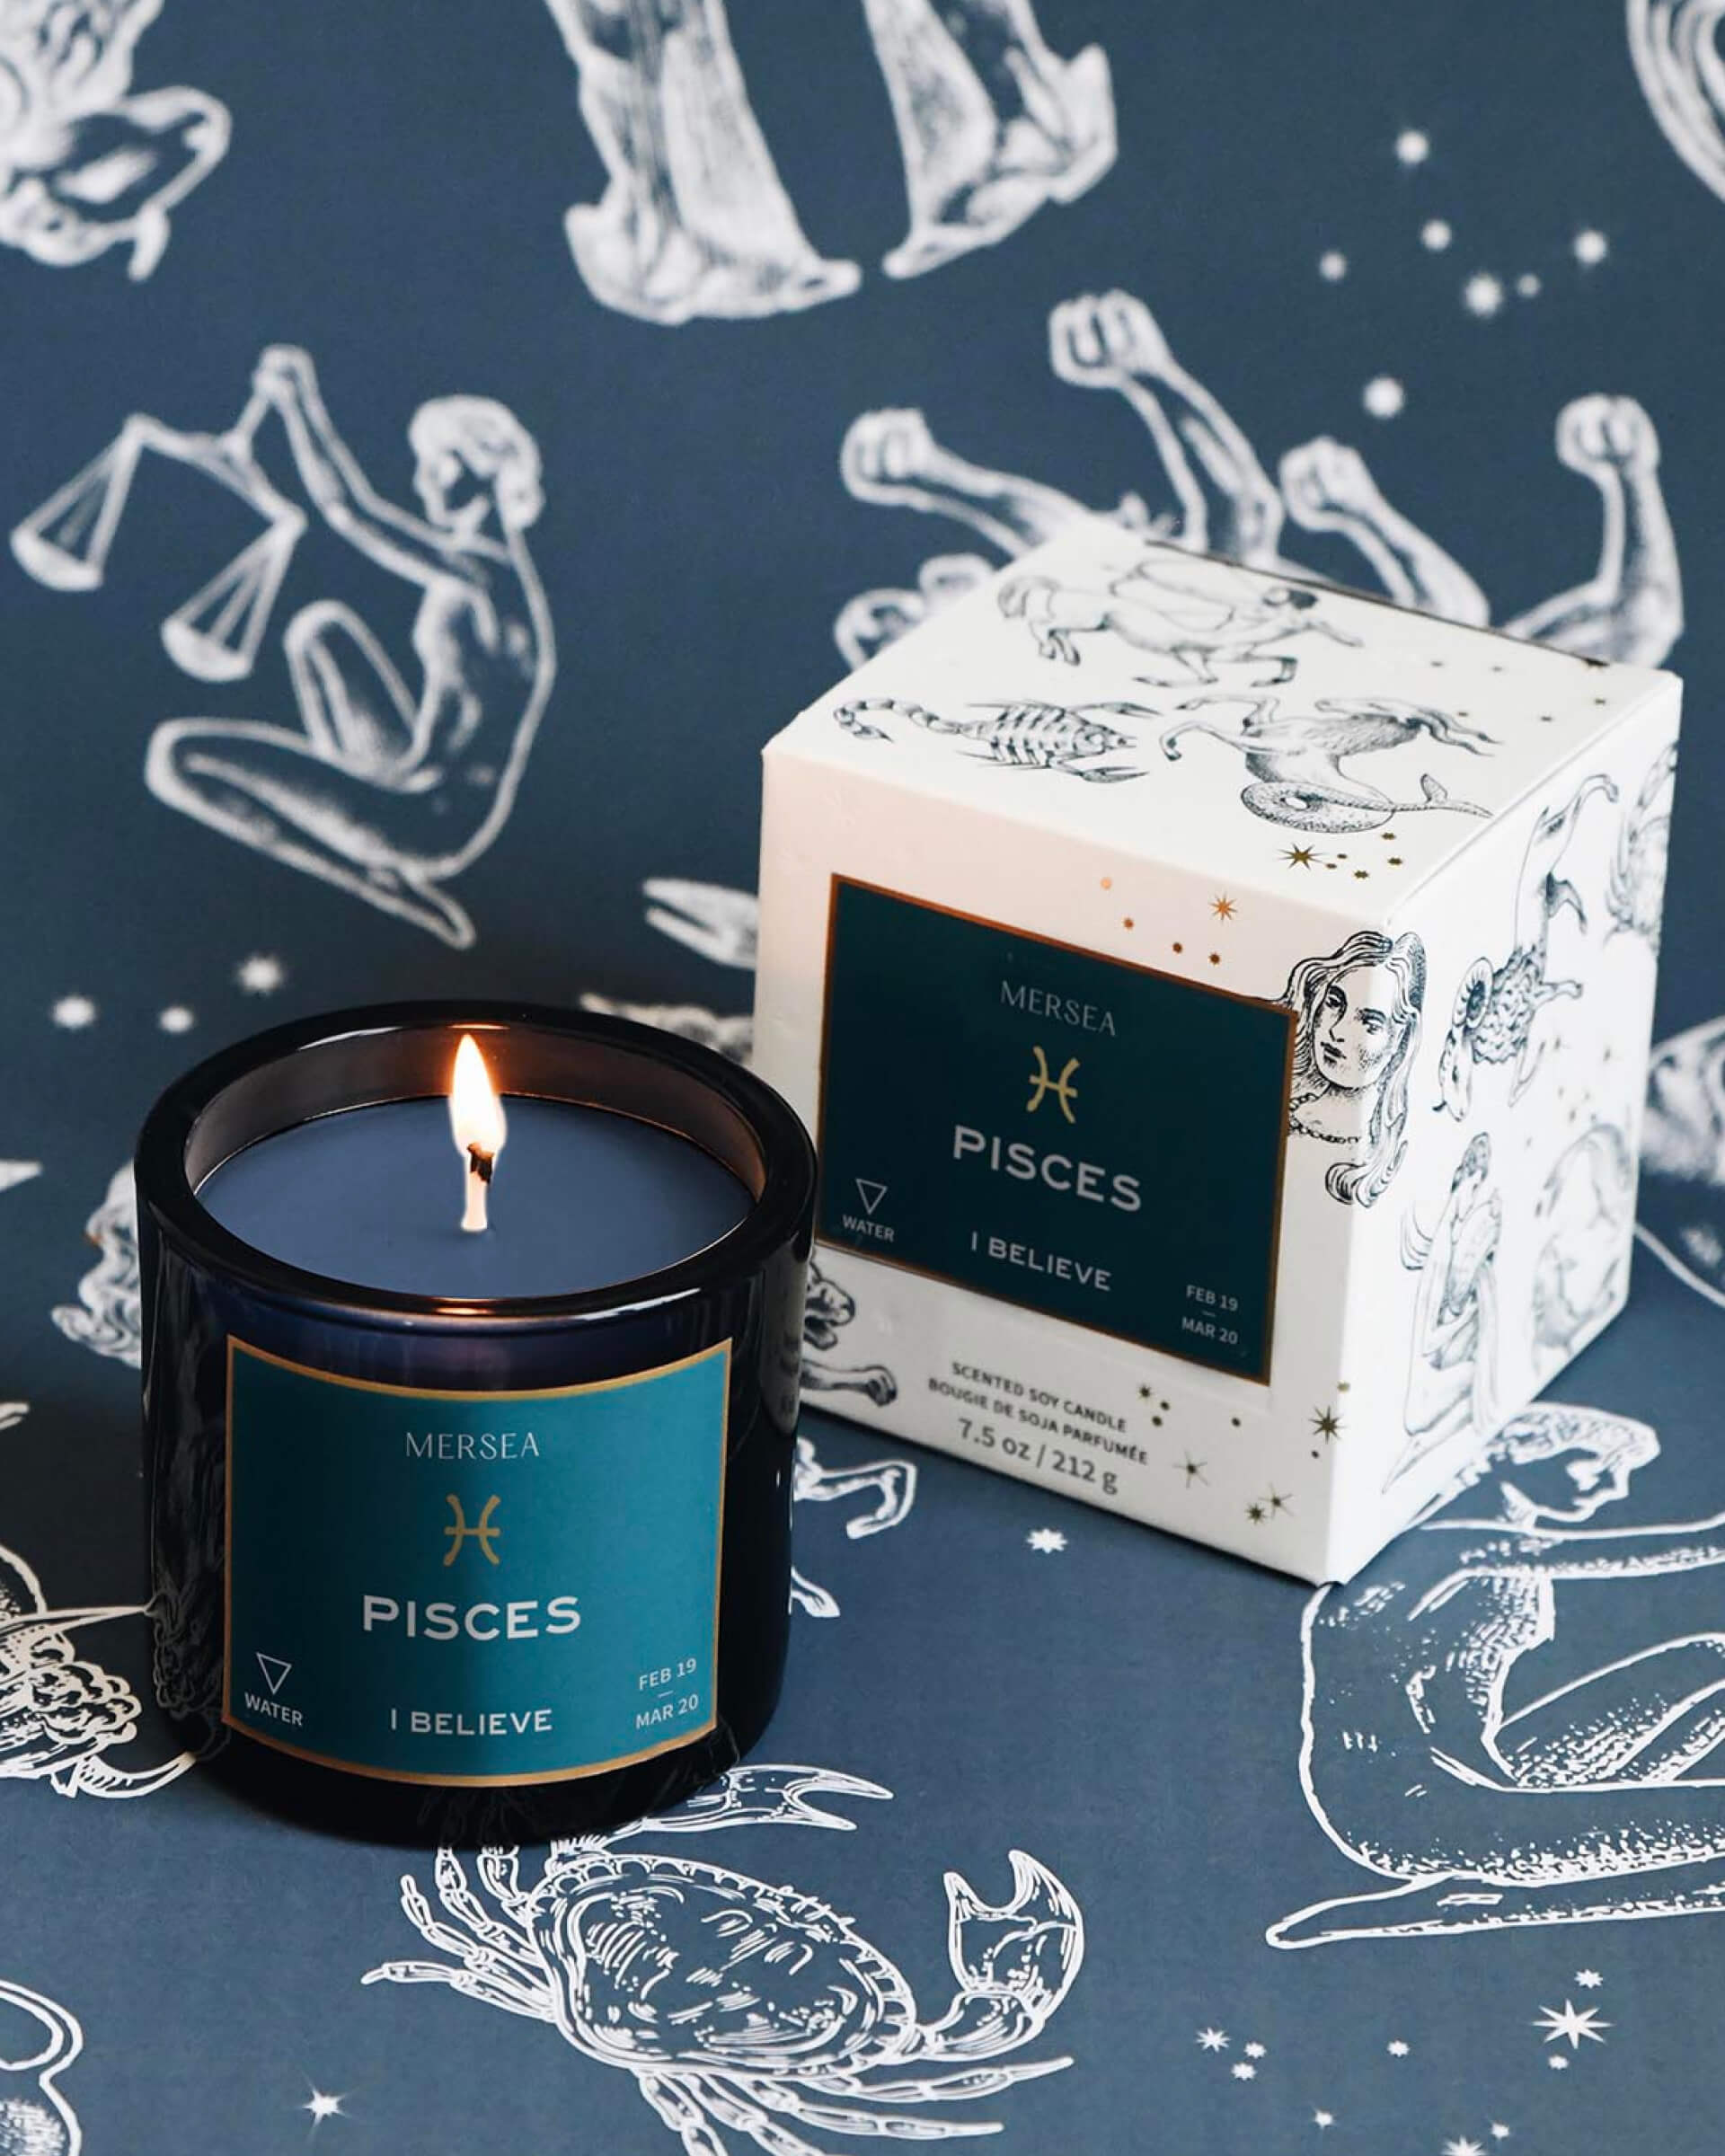 Mersea Pisces scented candle displayed beside its accompanying box, set against an astrology sign-themed backdrop